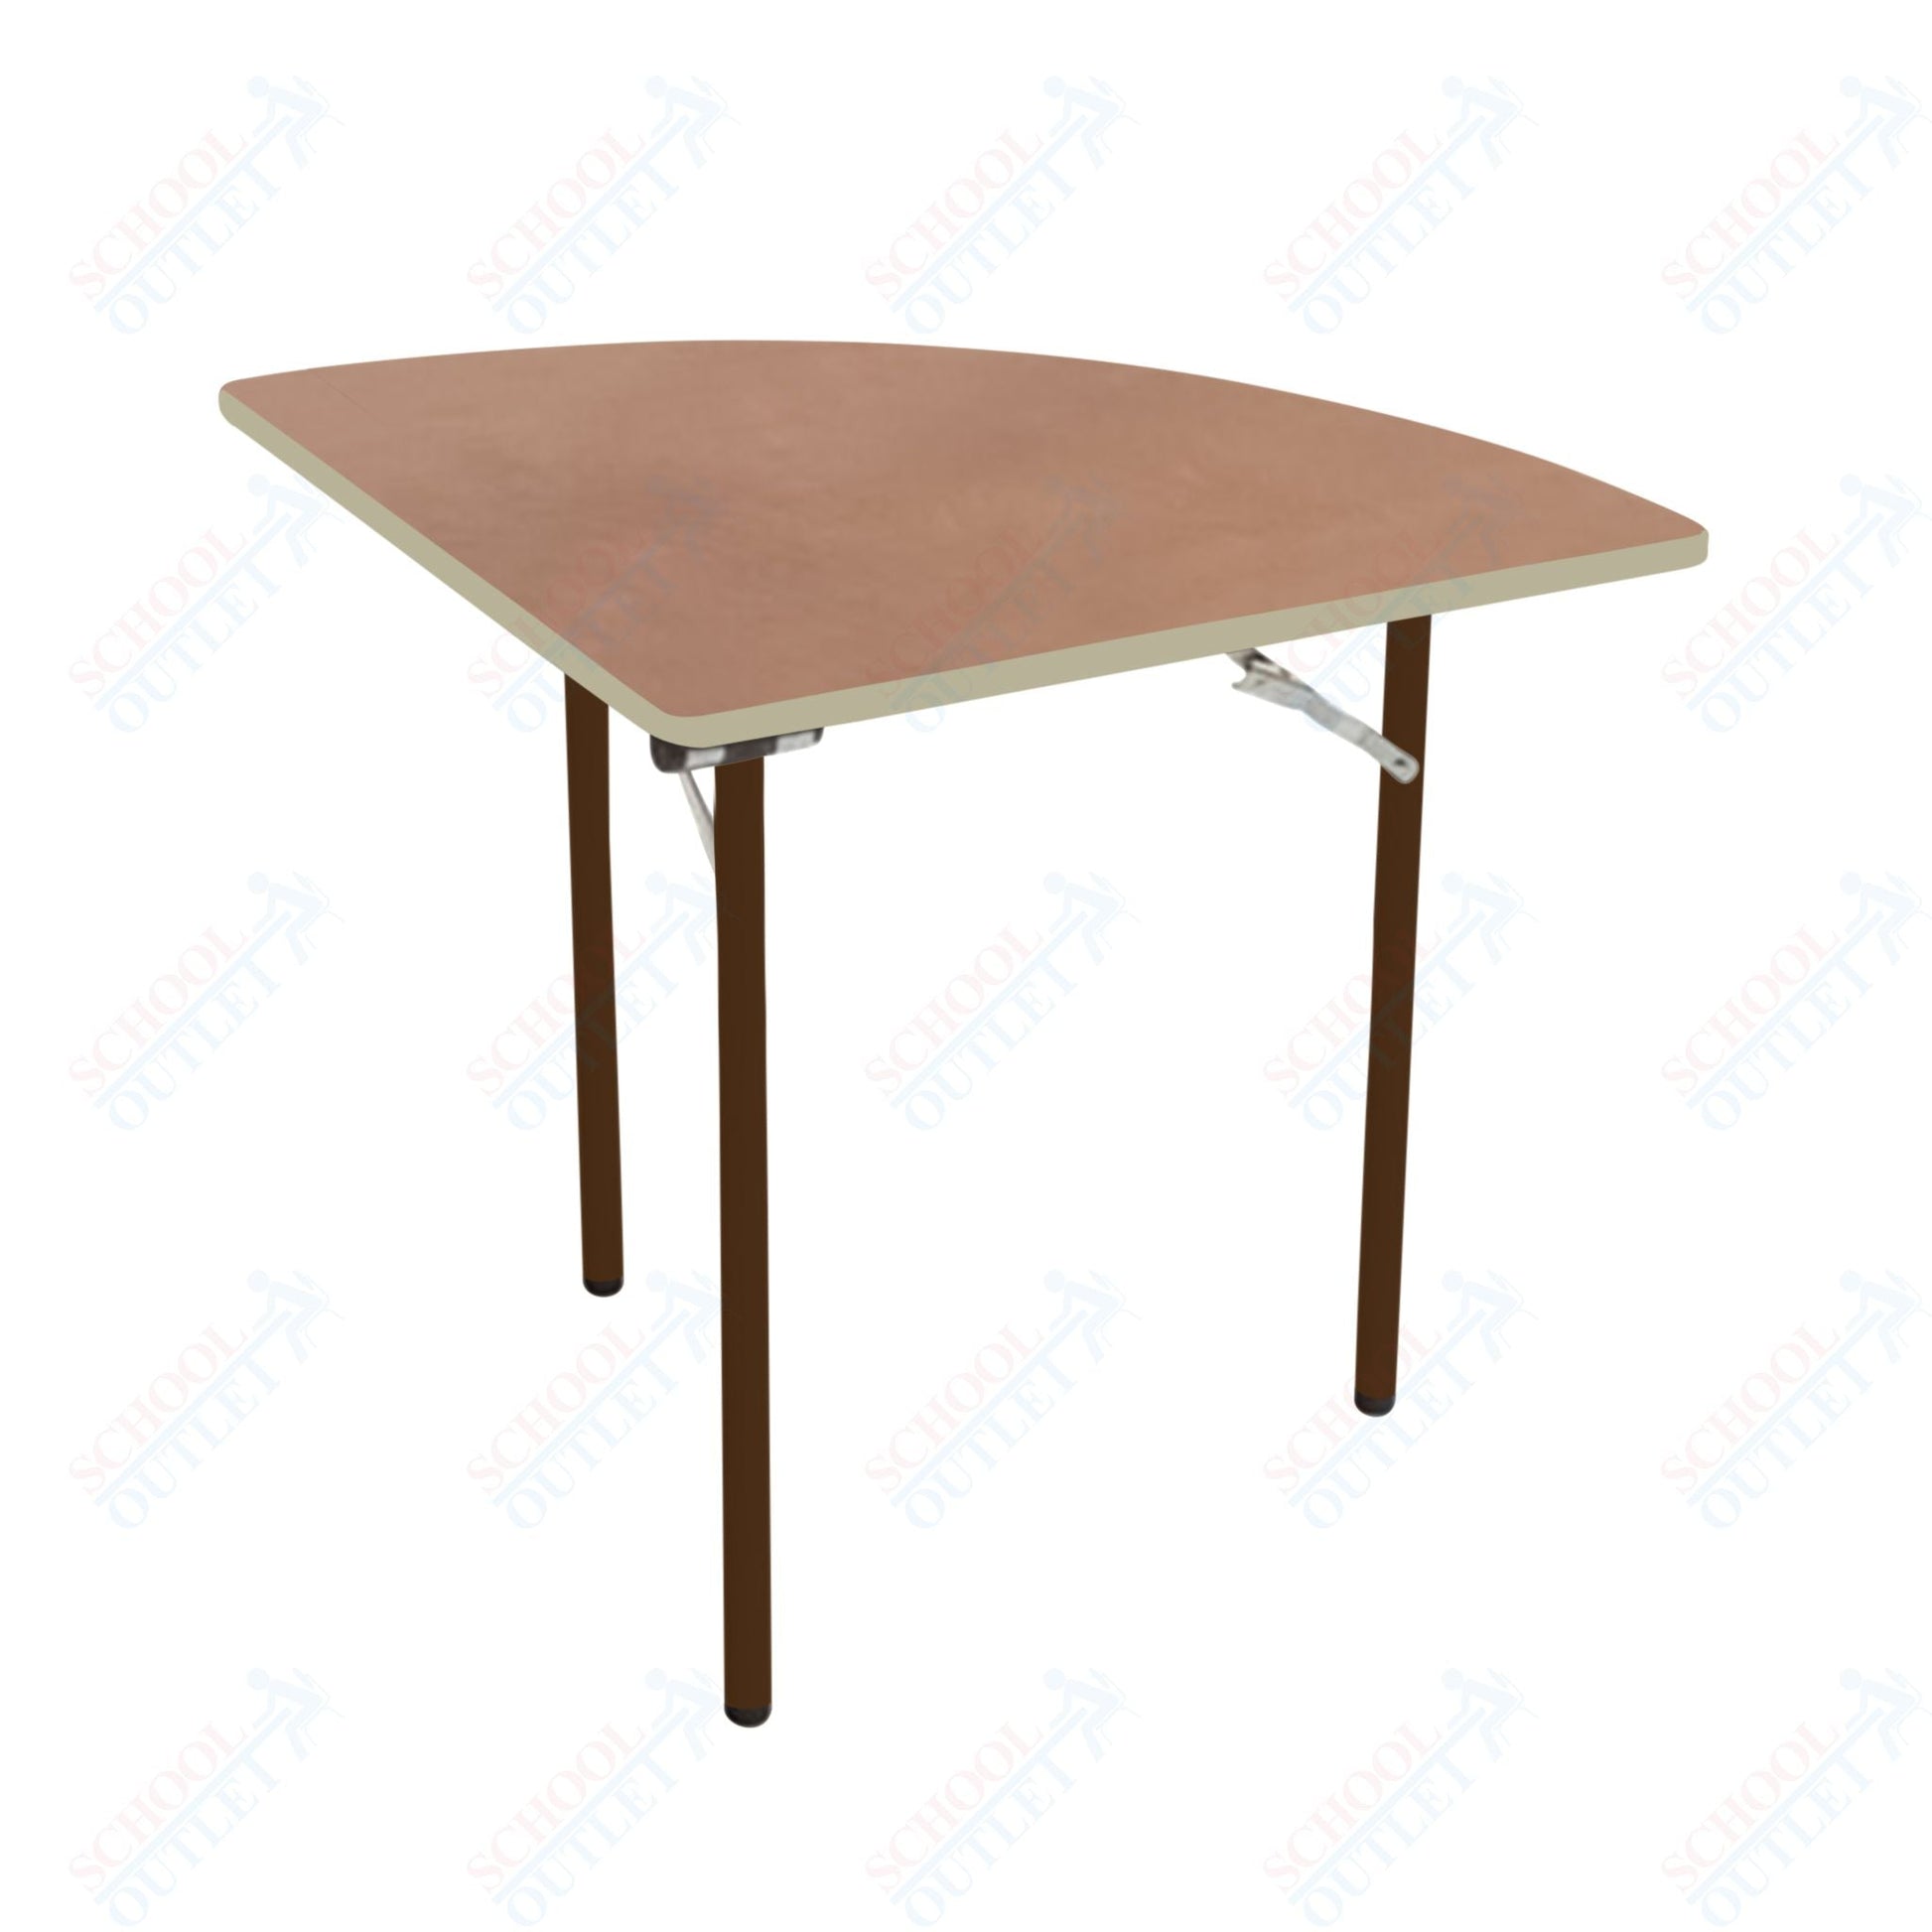 AmTab Folding Table - Plywood Stained and Sealed - Vinyl T - Molding Edge - Quarter Round - Quarter 48" Diameter x 29"H (AmTab AMT - QR48PM) - SchoolOutlet